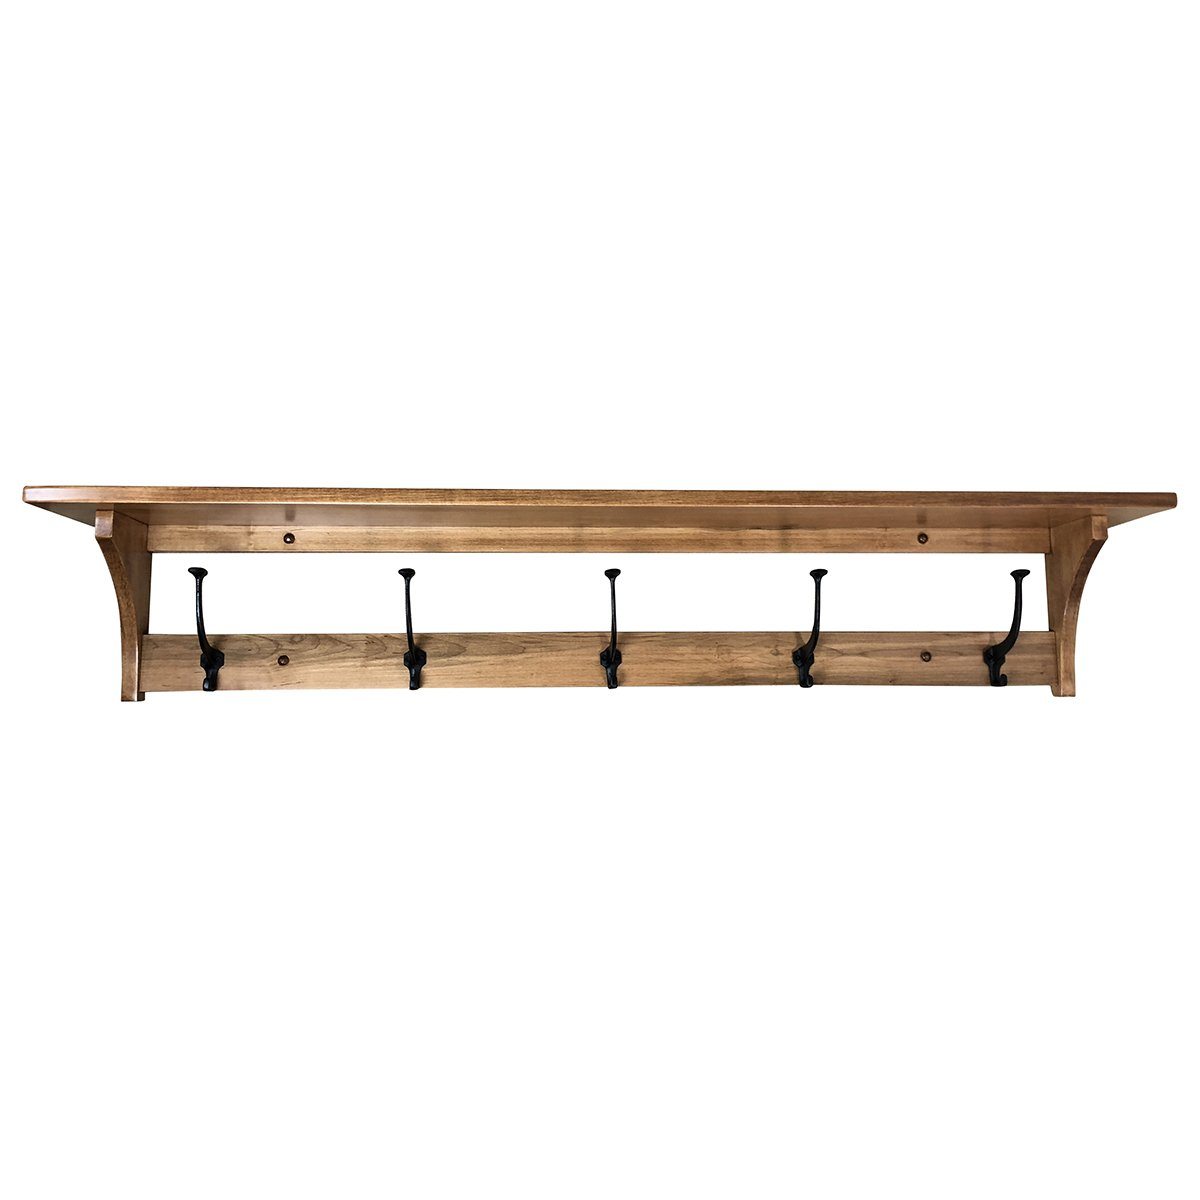 Brown Maple, Shaker Style Hanging Coat Rack with Shelf